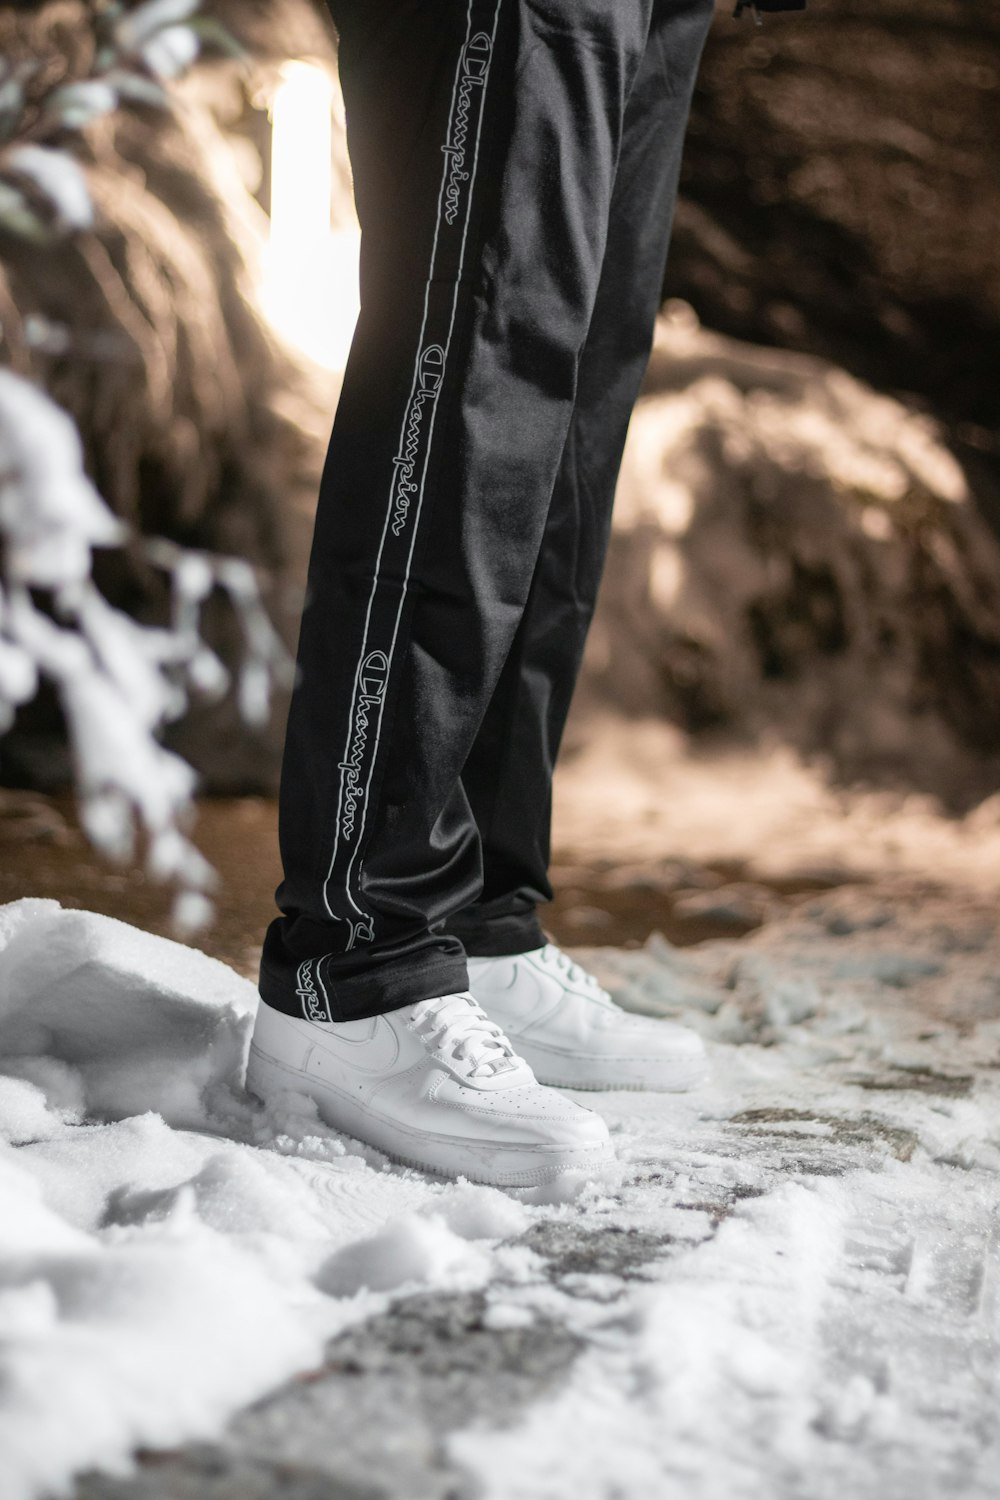 person in black denim jeans and white sneakers standing on snow covered ground during daytime